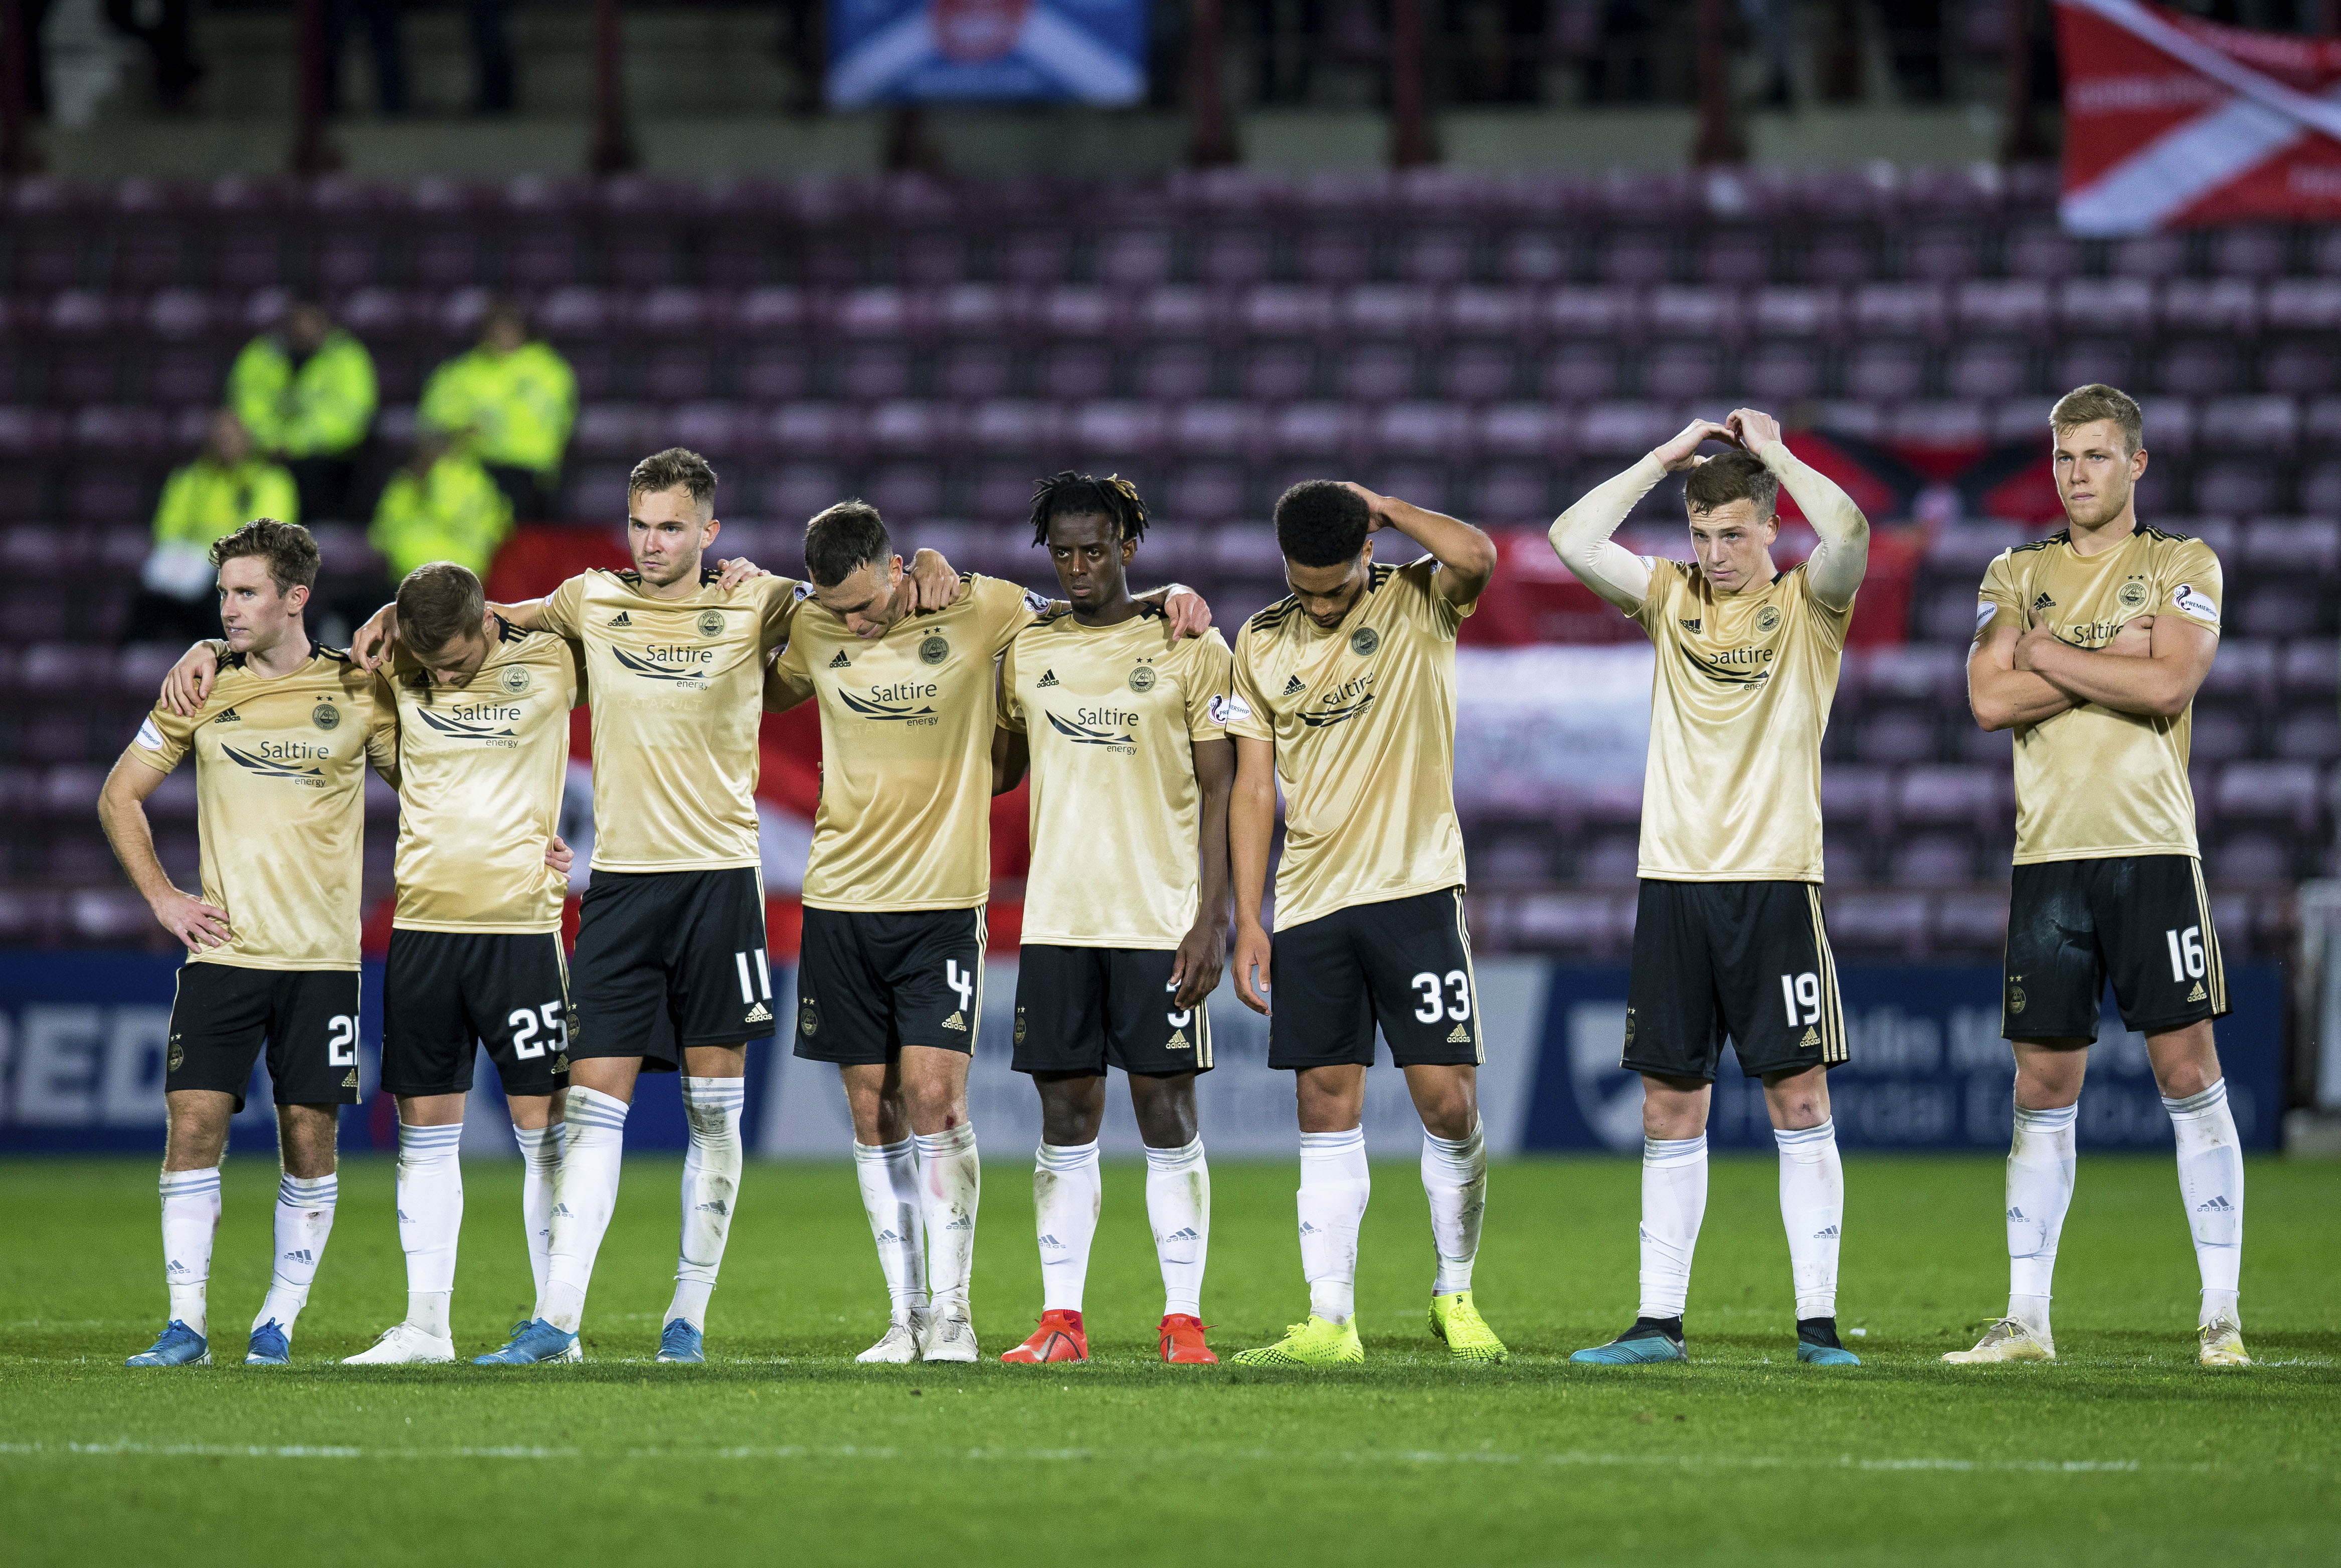 Aberdeen players look dejected at full time of the Betfred Cup defeat to Hearts.